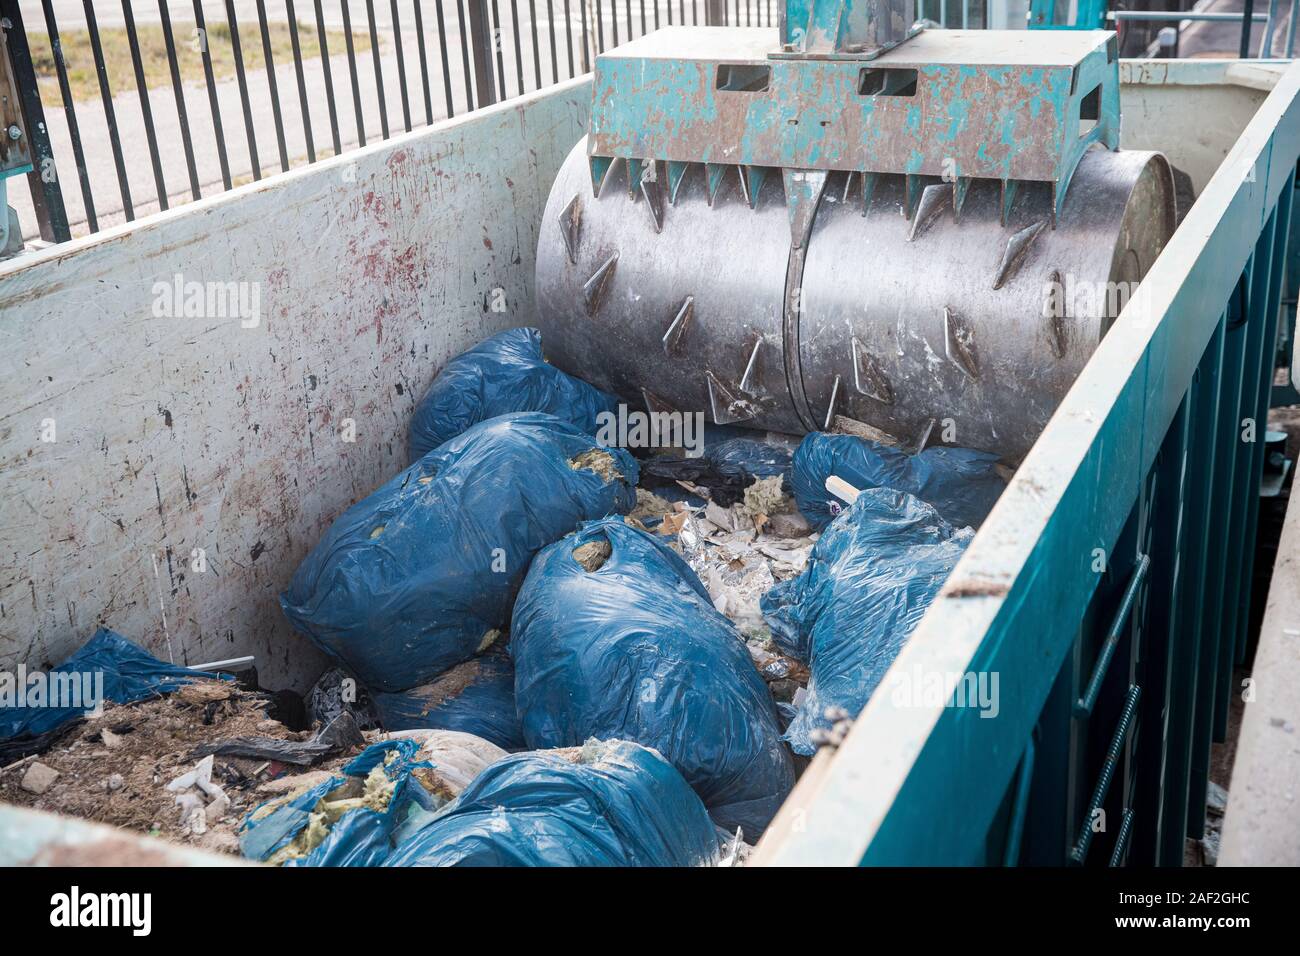 Special equipment is pressing construction waste in a container for recycling in Sorting station Stock Photo